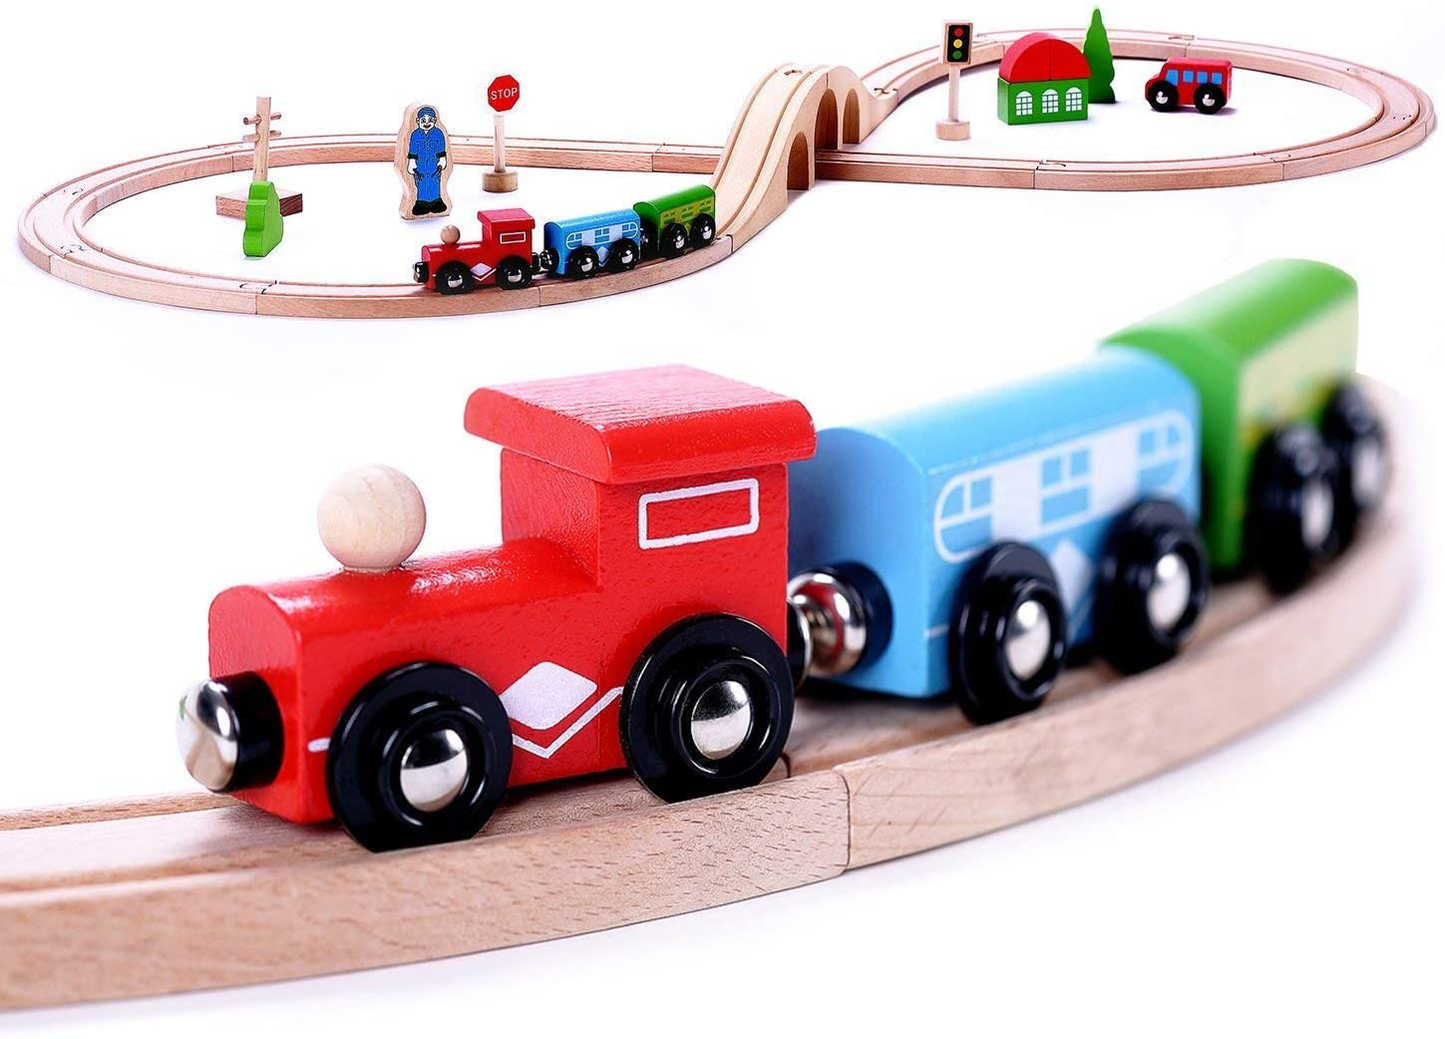 Premium Wooden Train Set Toy, 30pcs Double-Sided Train Tracks, Magnetic Trains Cars & Accessories for 3 Year Olds and Up - Compatible with Thomas Tank Engine and Other Major Brands